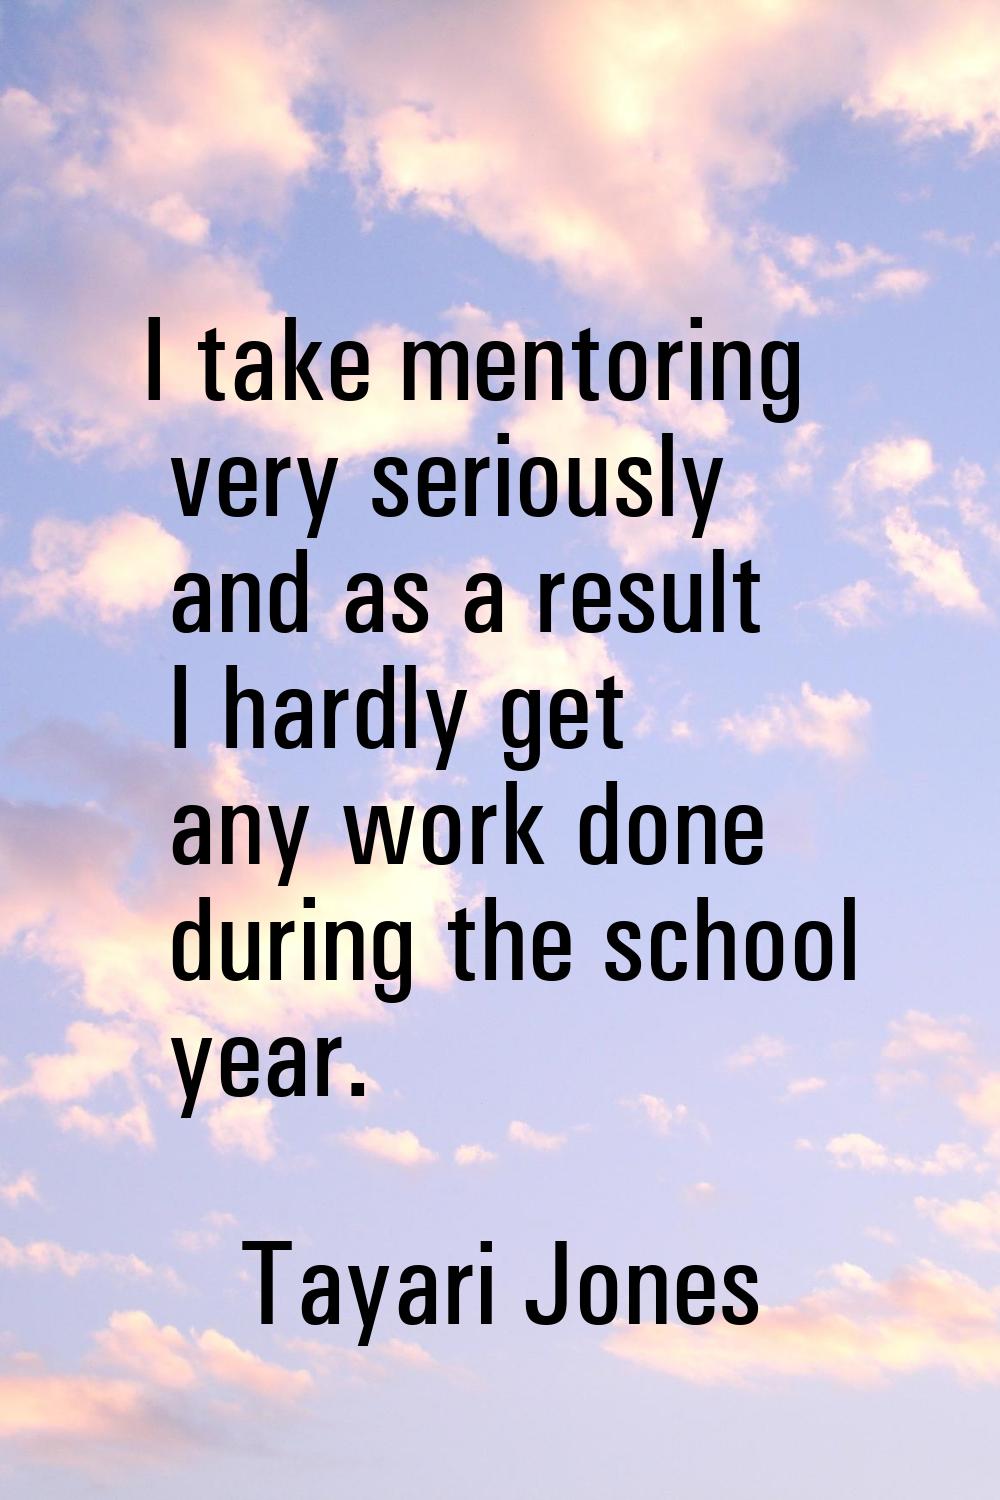 I take mentoring very seriously and as a result I hardly get any work done during the school year.